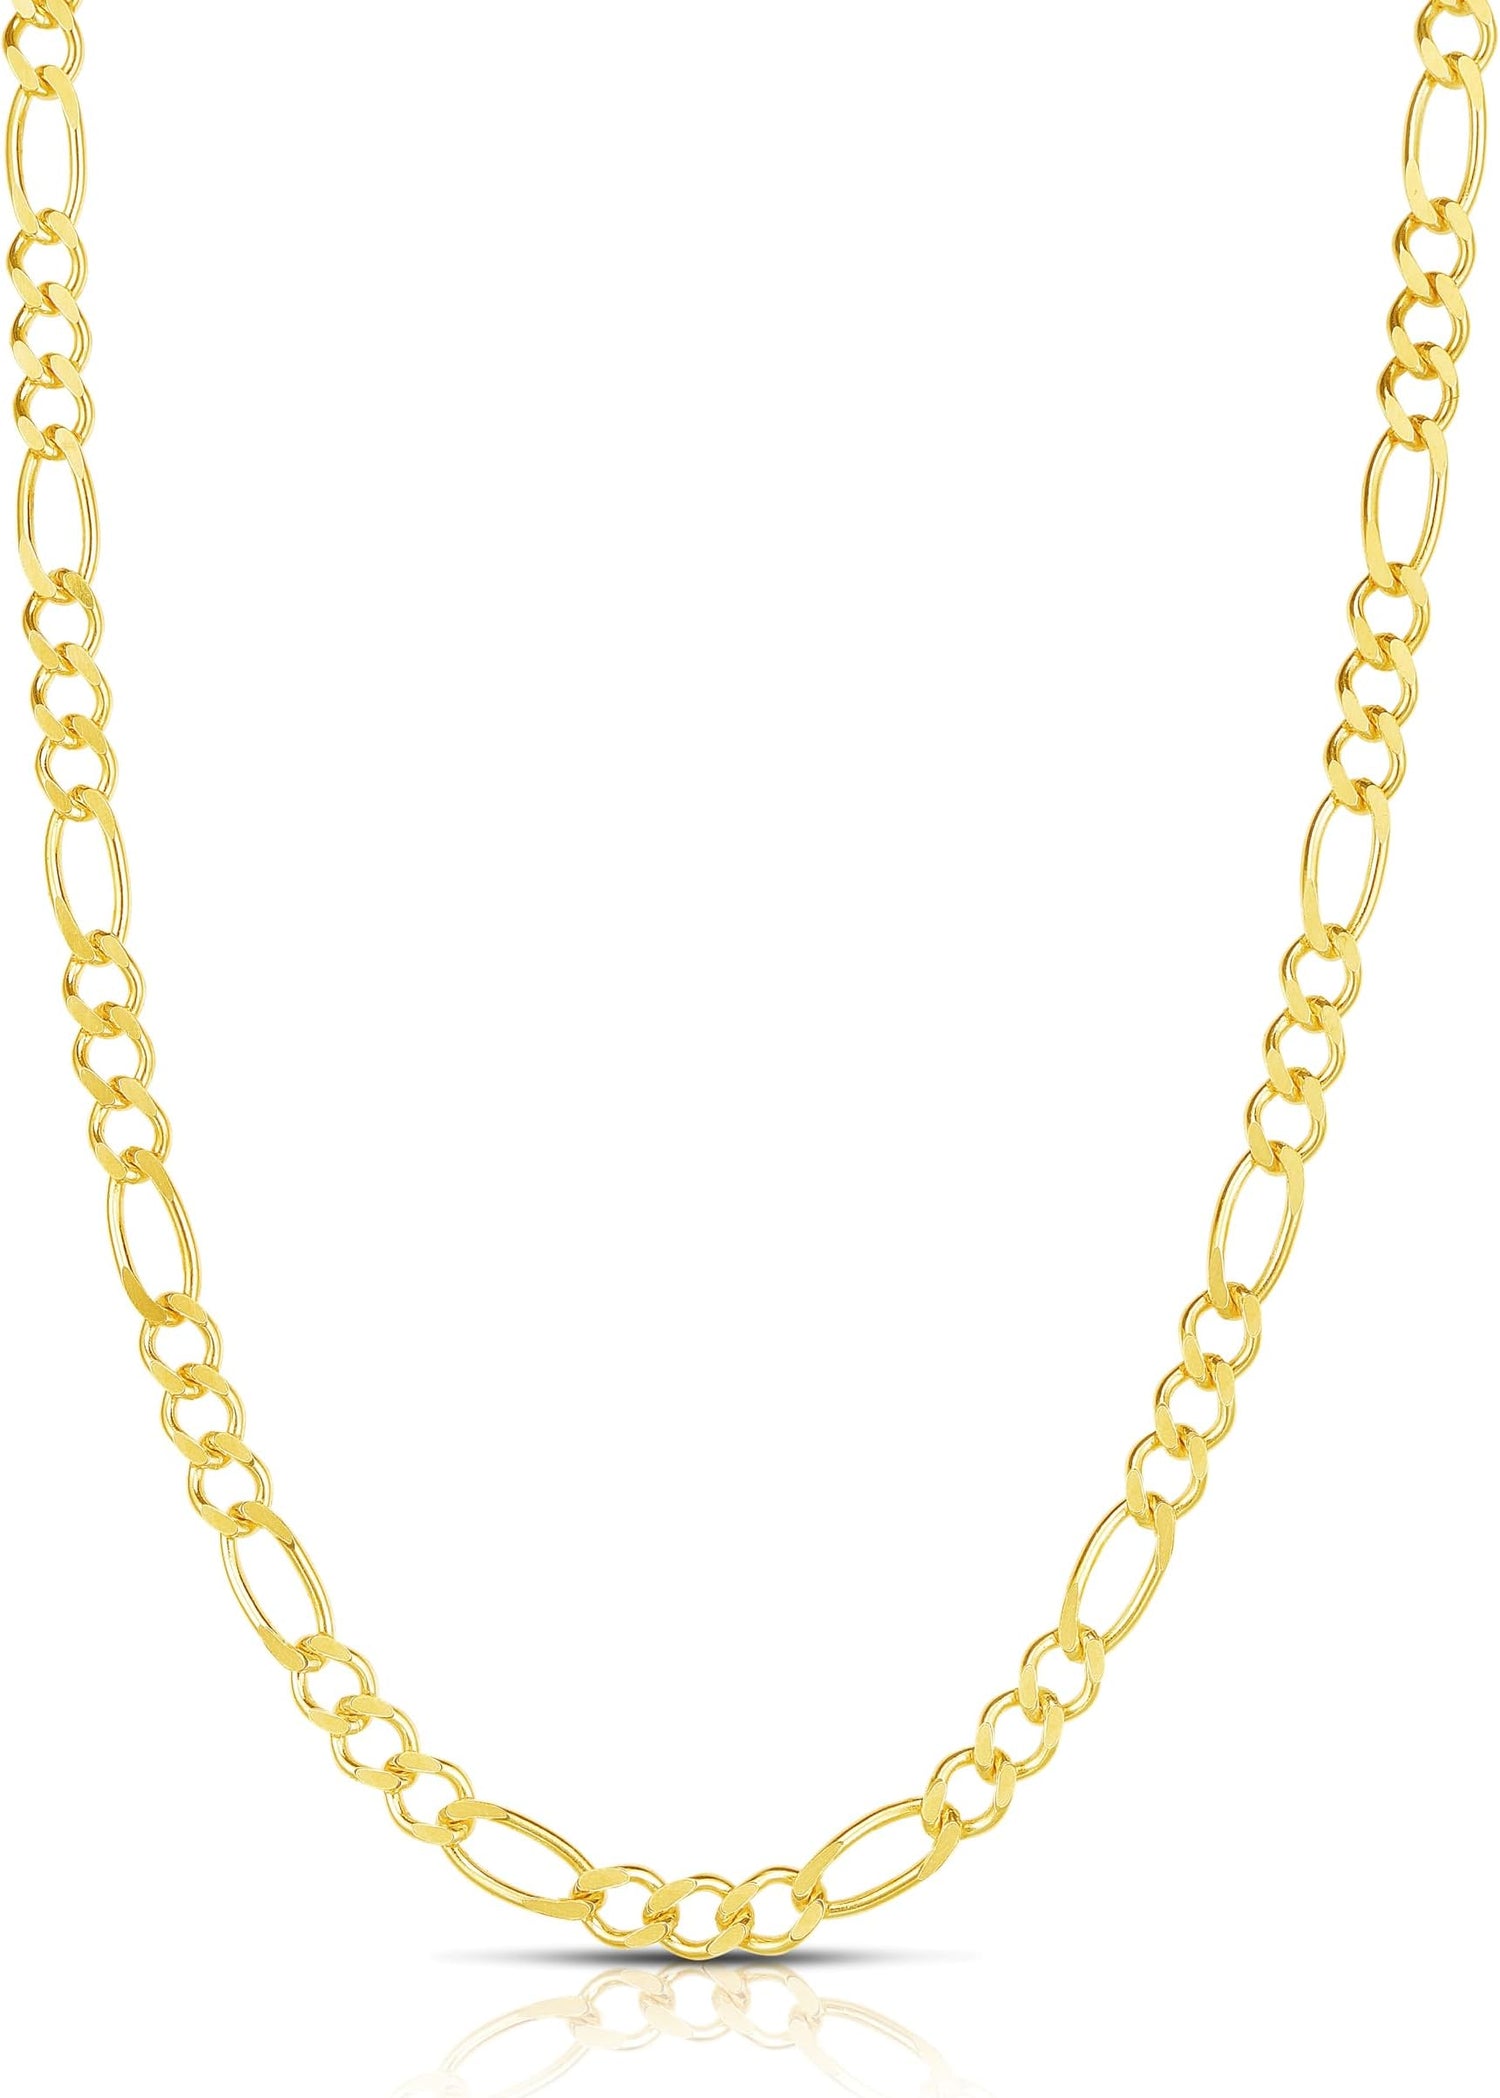 10k Yellow Gold 2.5mm Solid Figaro Chain Link Necklace - 16 inch